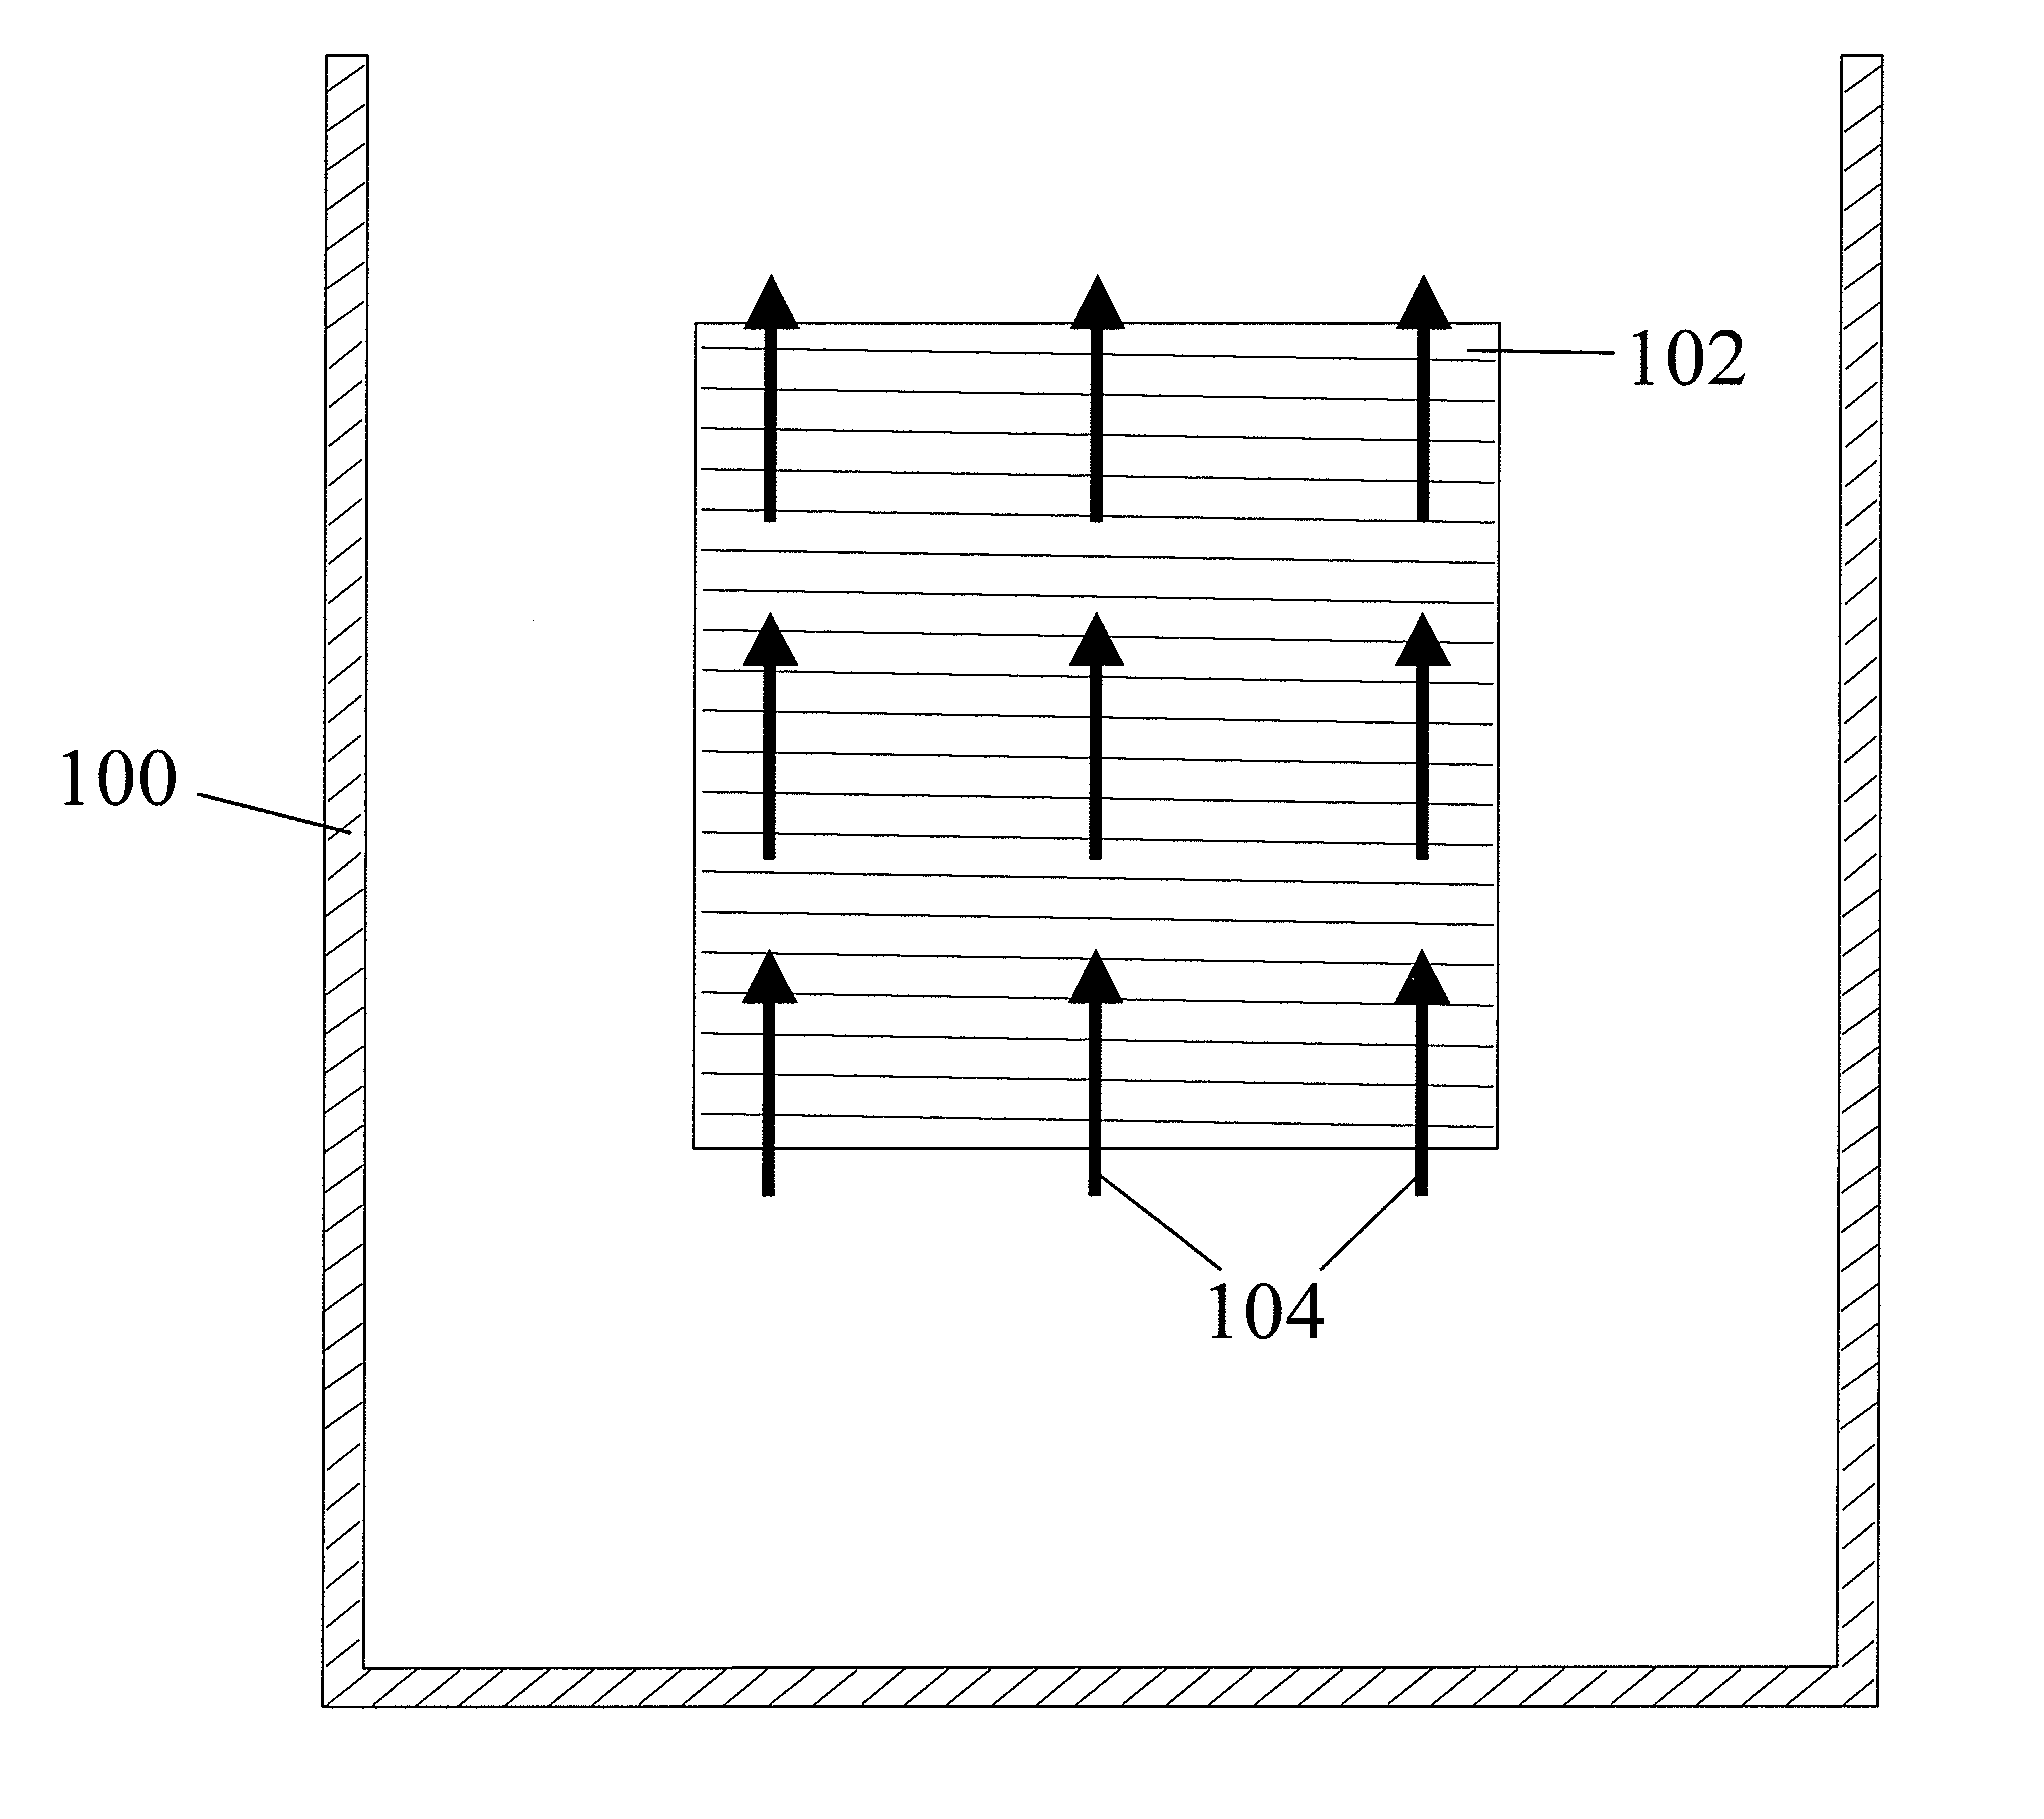 Electroplating cell with hydrodynamics facilitating more uniform deposition on a workpiece with through holes during plating